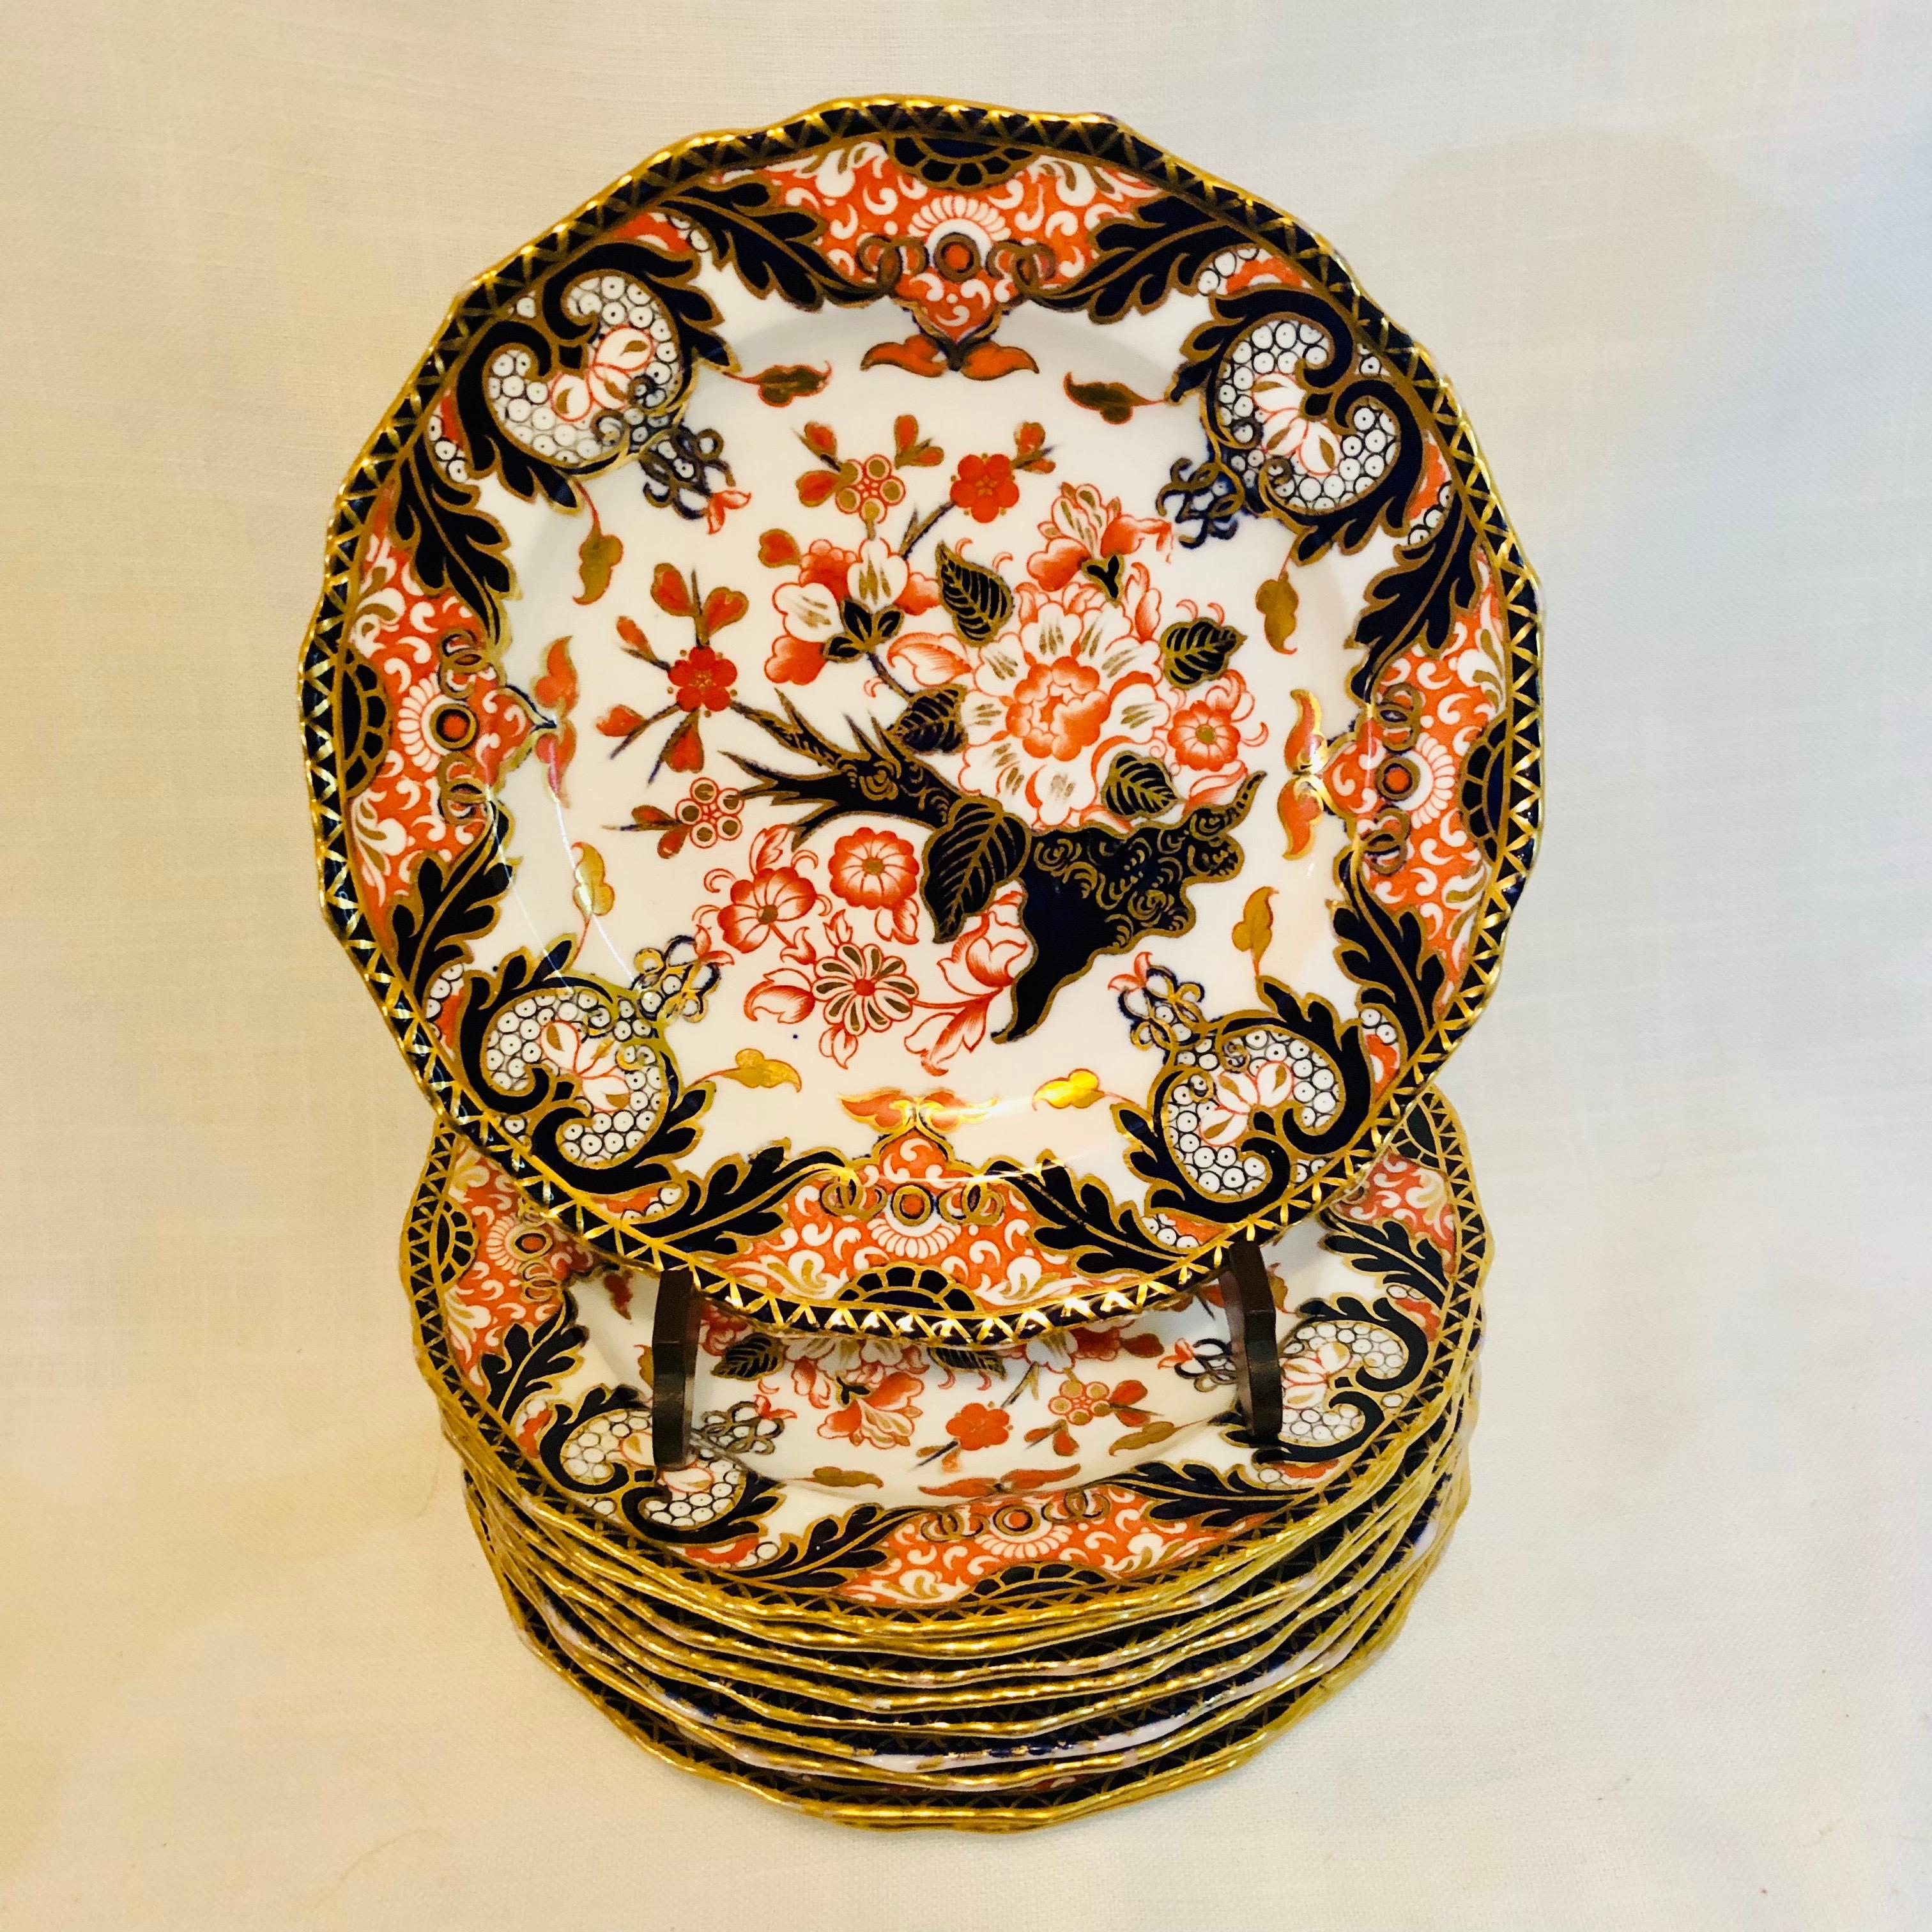 This is a stunning set of ten Royal Crown Derby imari pattern luncheon or dessert plates from 1888. They have a fluted border with cobalt and gold accents. The imari pattern painting on these plates is beautiful and very detailed. They would make an